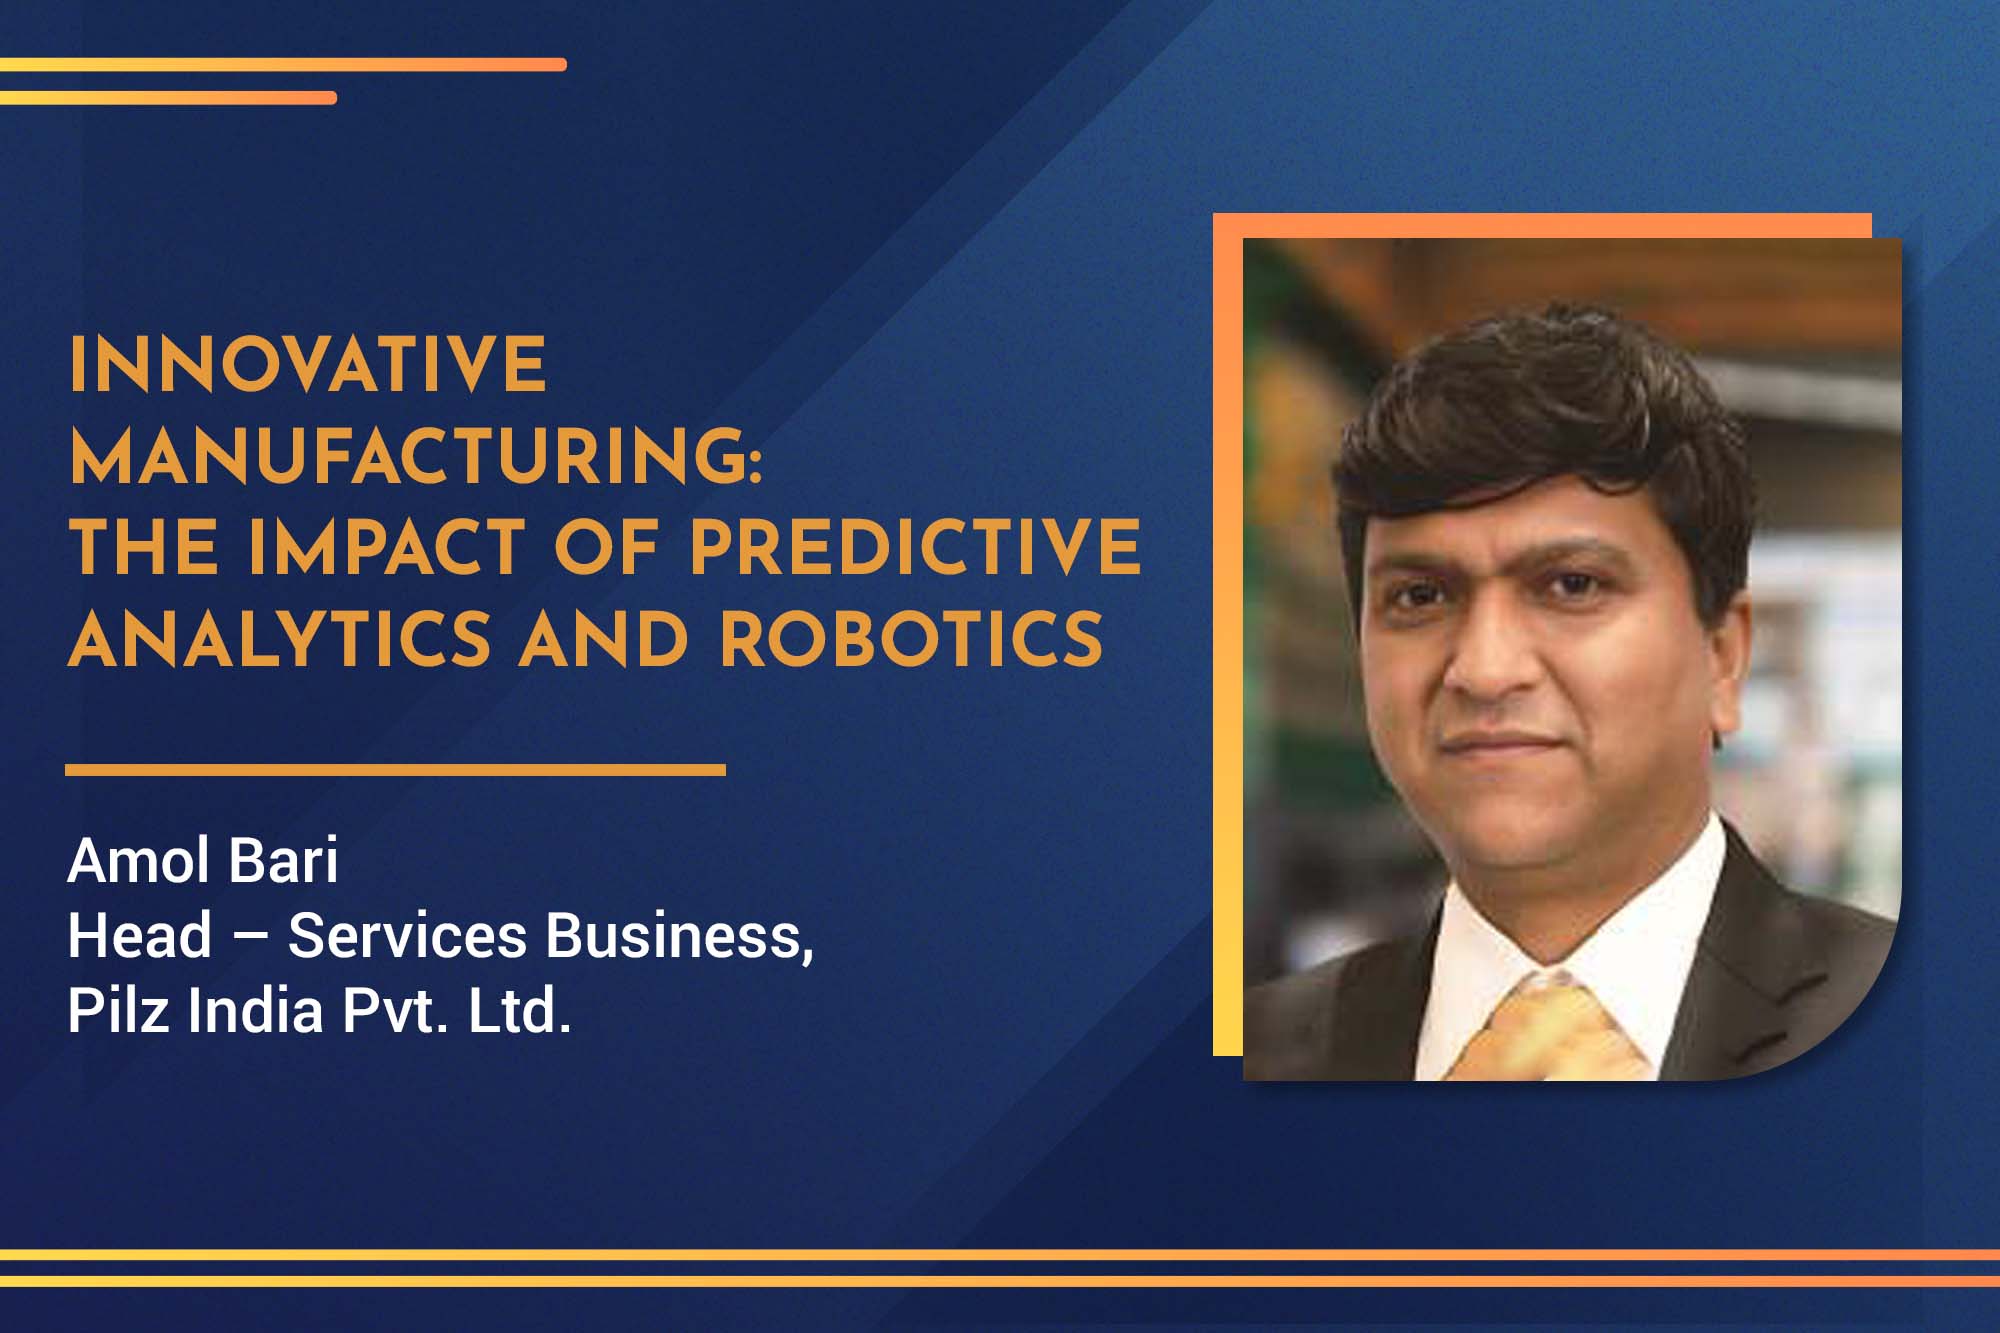 Innovative manufacturing: The impact of predictive analytics and robotics